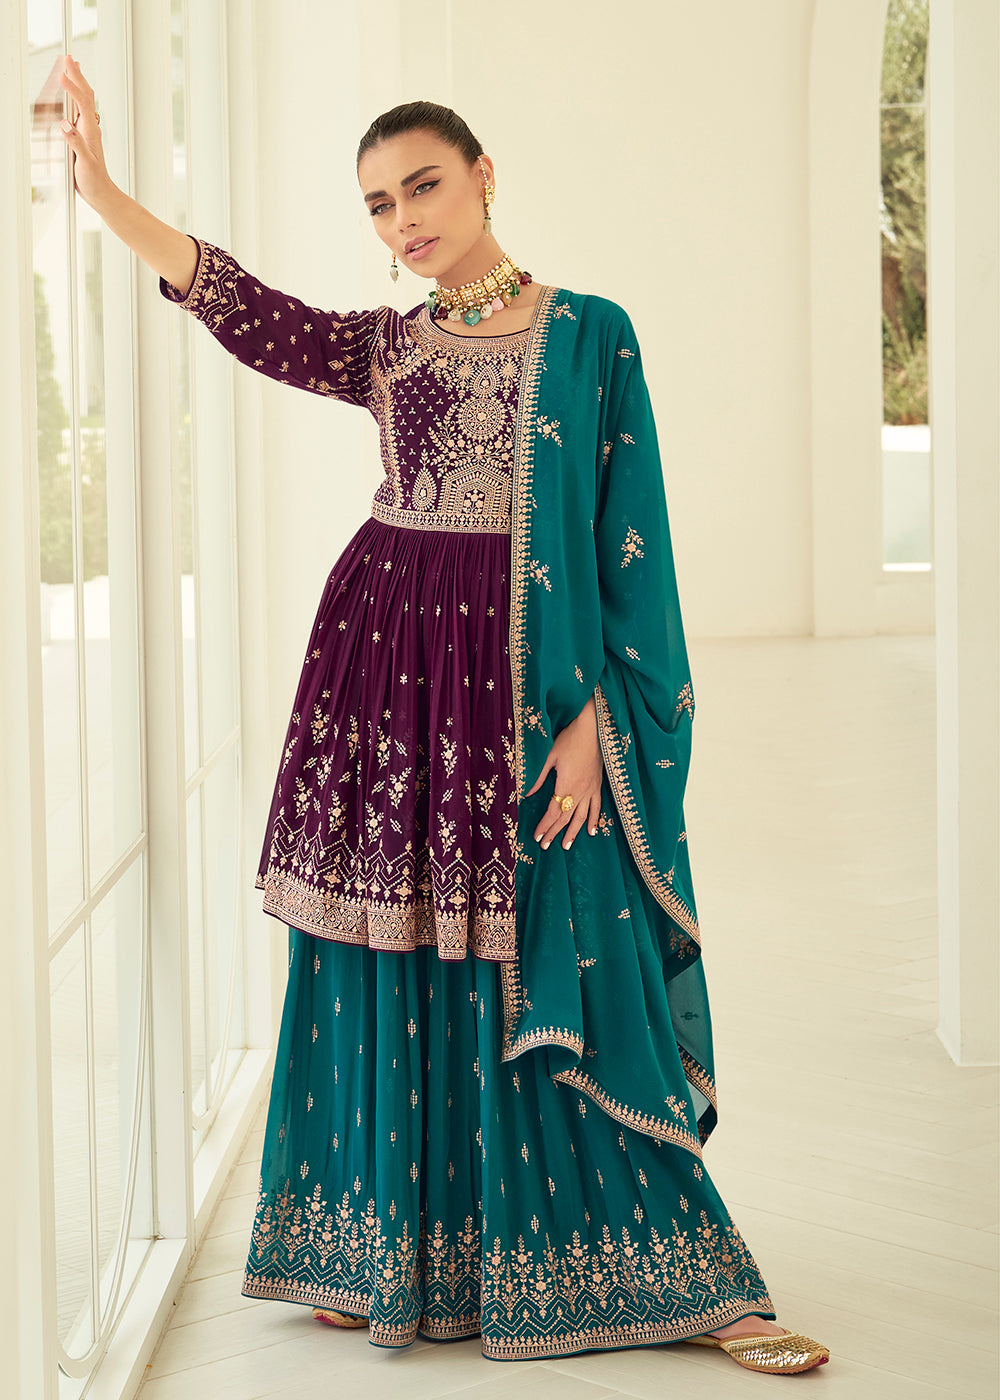 Buy Now Gorgeous Georgette Purple & Teal Wedding Palazzo Suit Online in USA, UK, Canada, Germany, Australia & Worldwide at Empress Clothing.